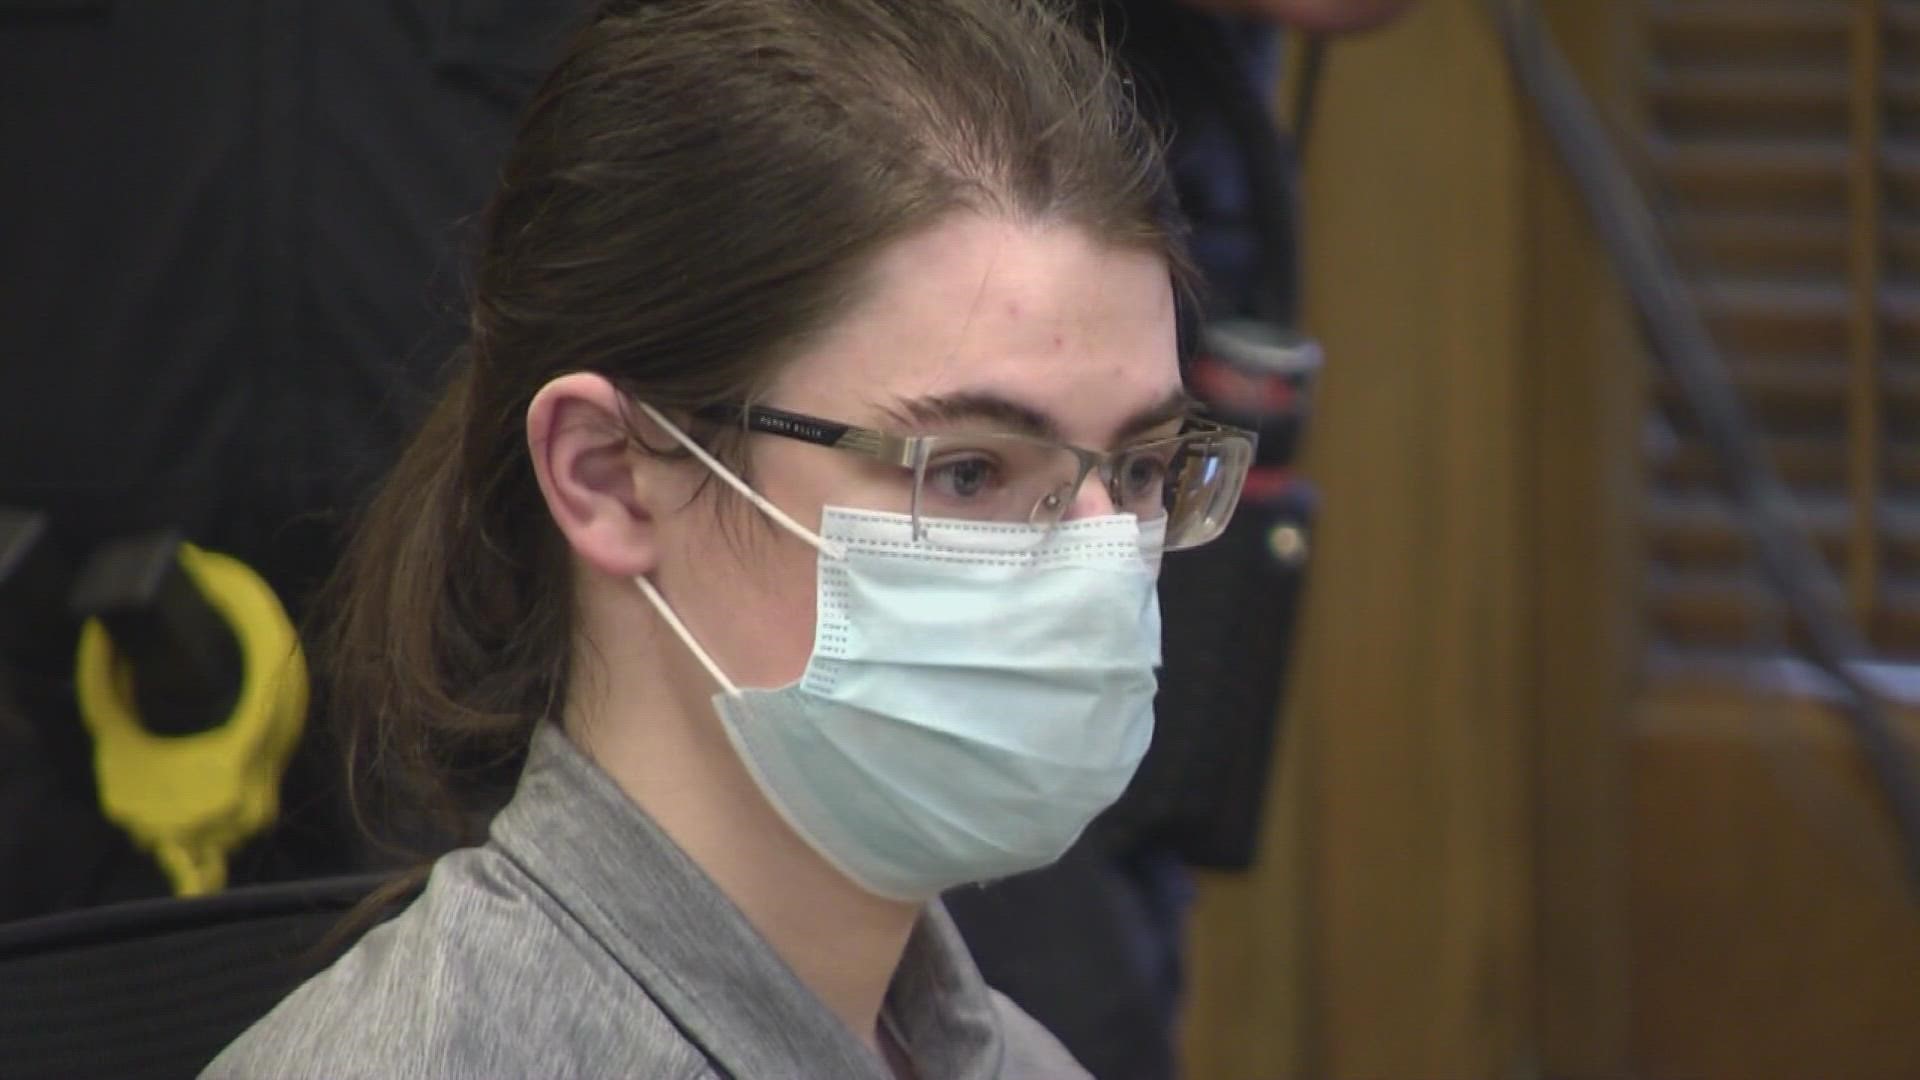 Sentencing is expected to finish this week for the Freeman High School shooter. Amanda Roley has a look at what we can expect over the next few days,